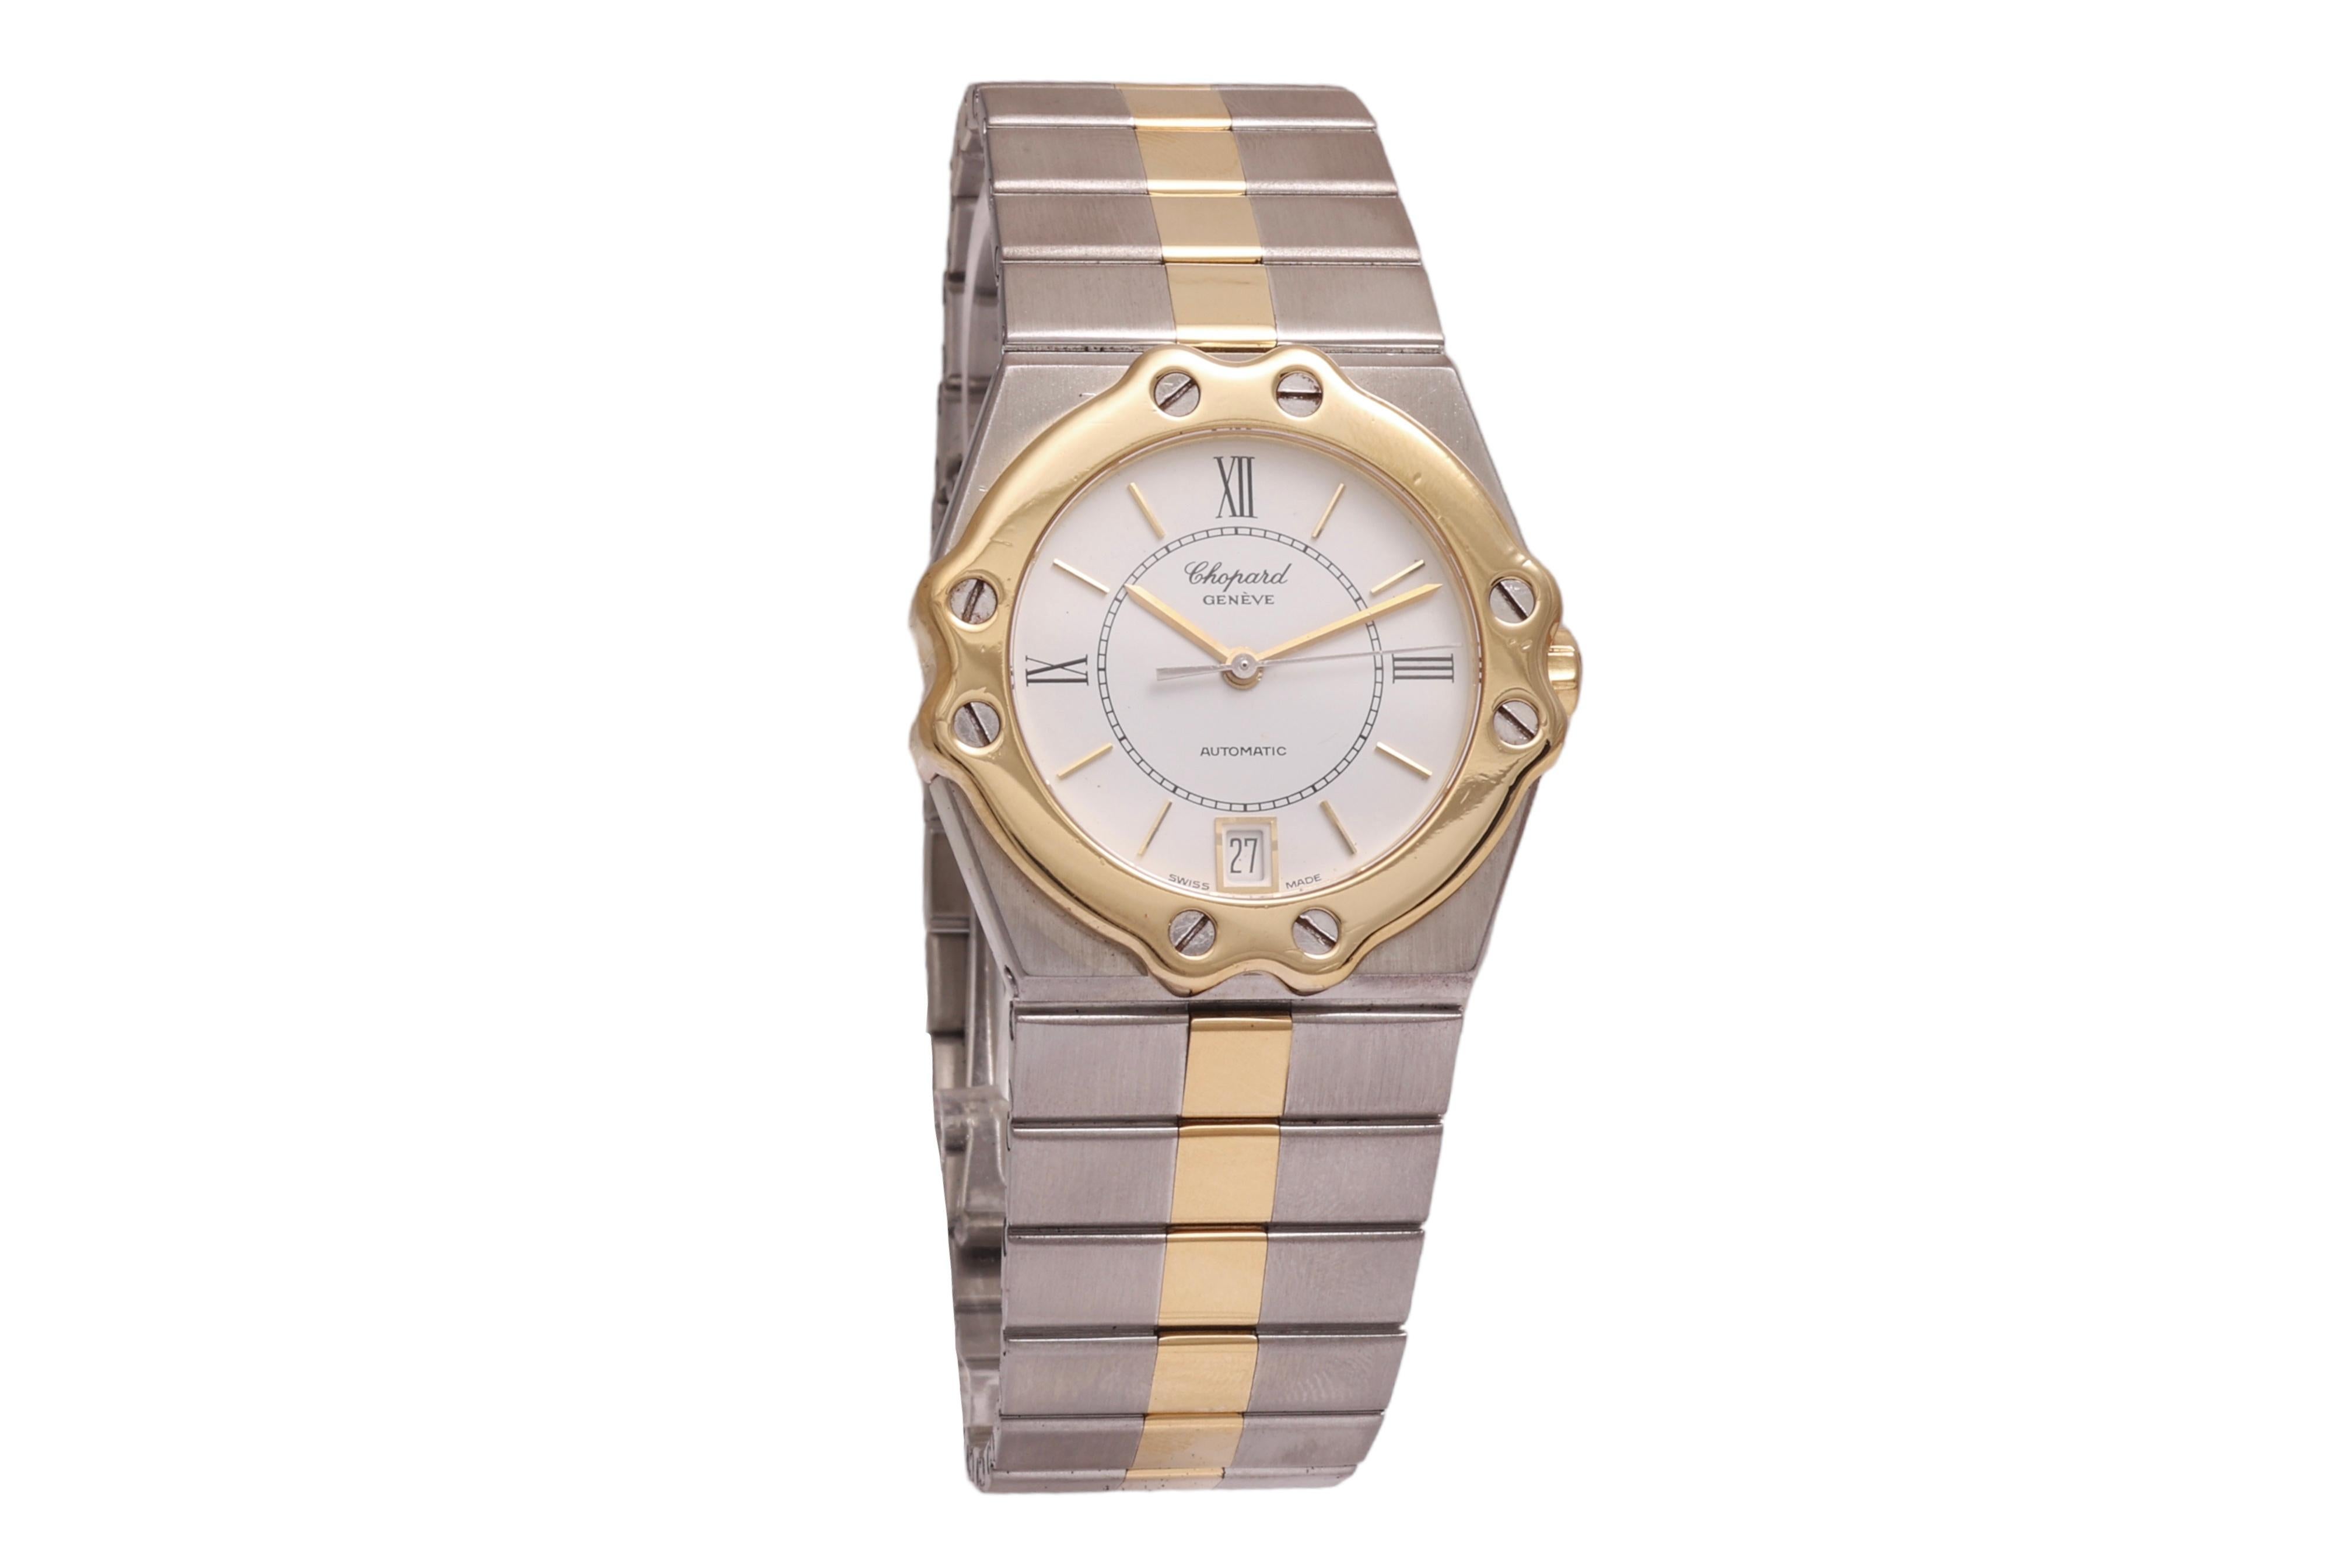 18 Kt Gold & Steel Chopard St Moritz Automatic Wrist Watch with Chopard Box

Dial : White
Movement : Mechanical With Automatic Winding
Case & Strap : 18 KT Gold & Stainless Steel